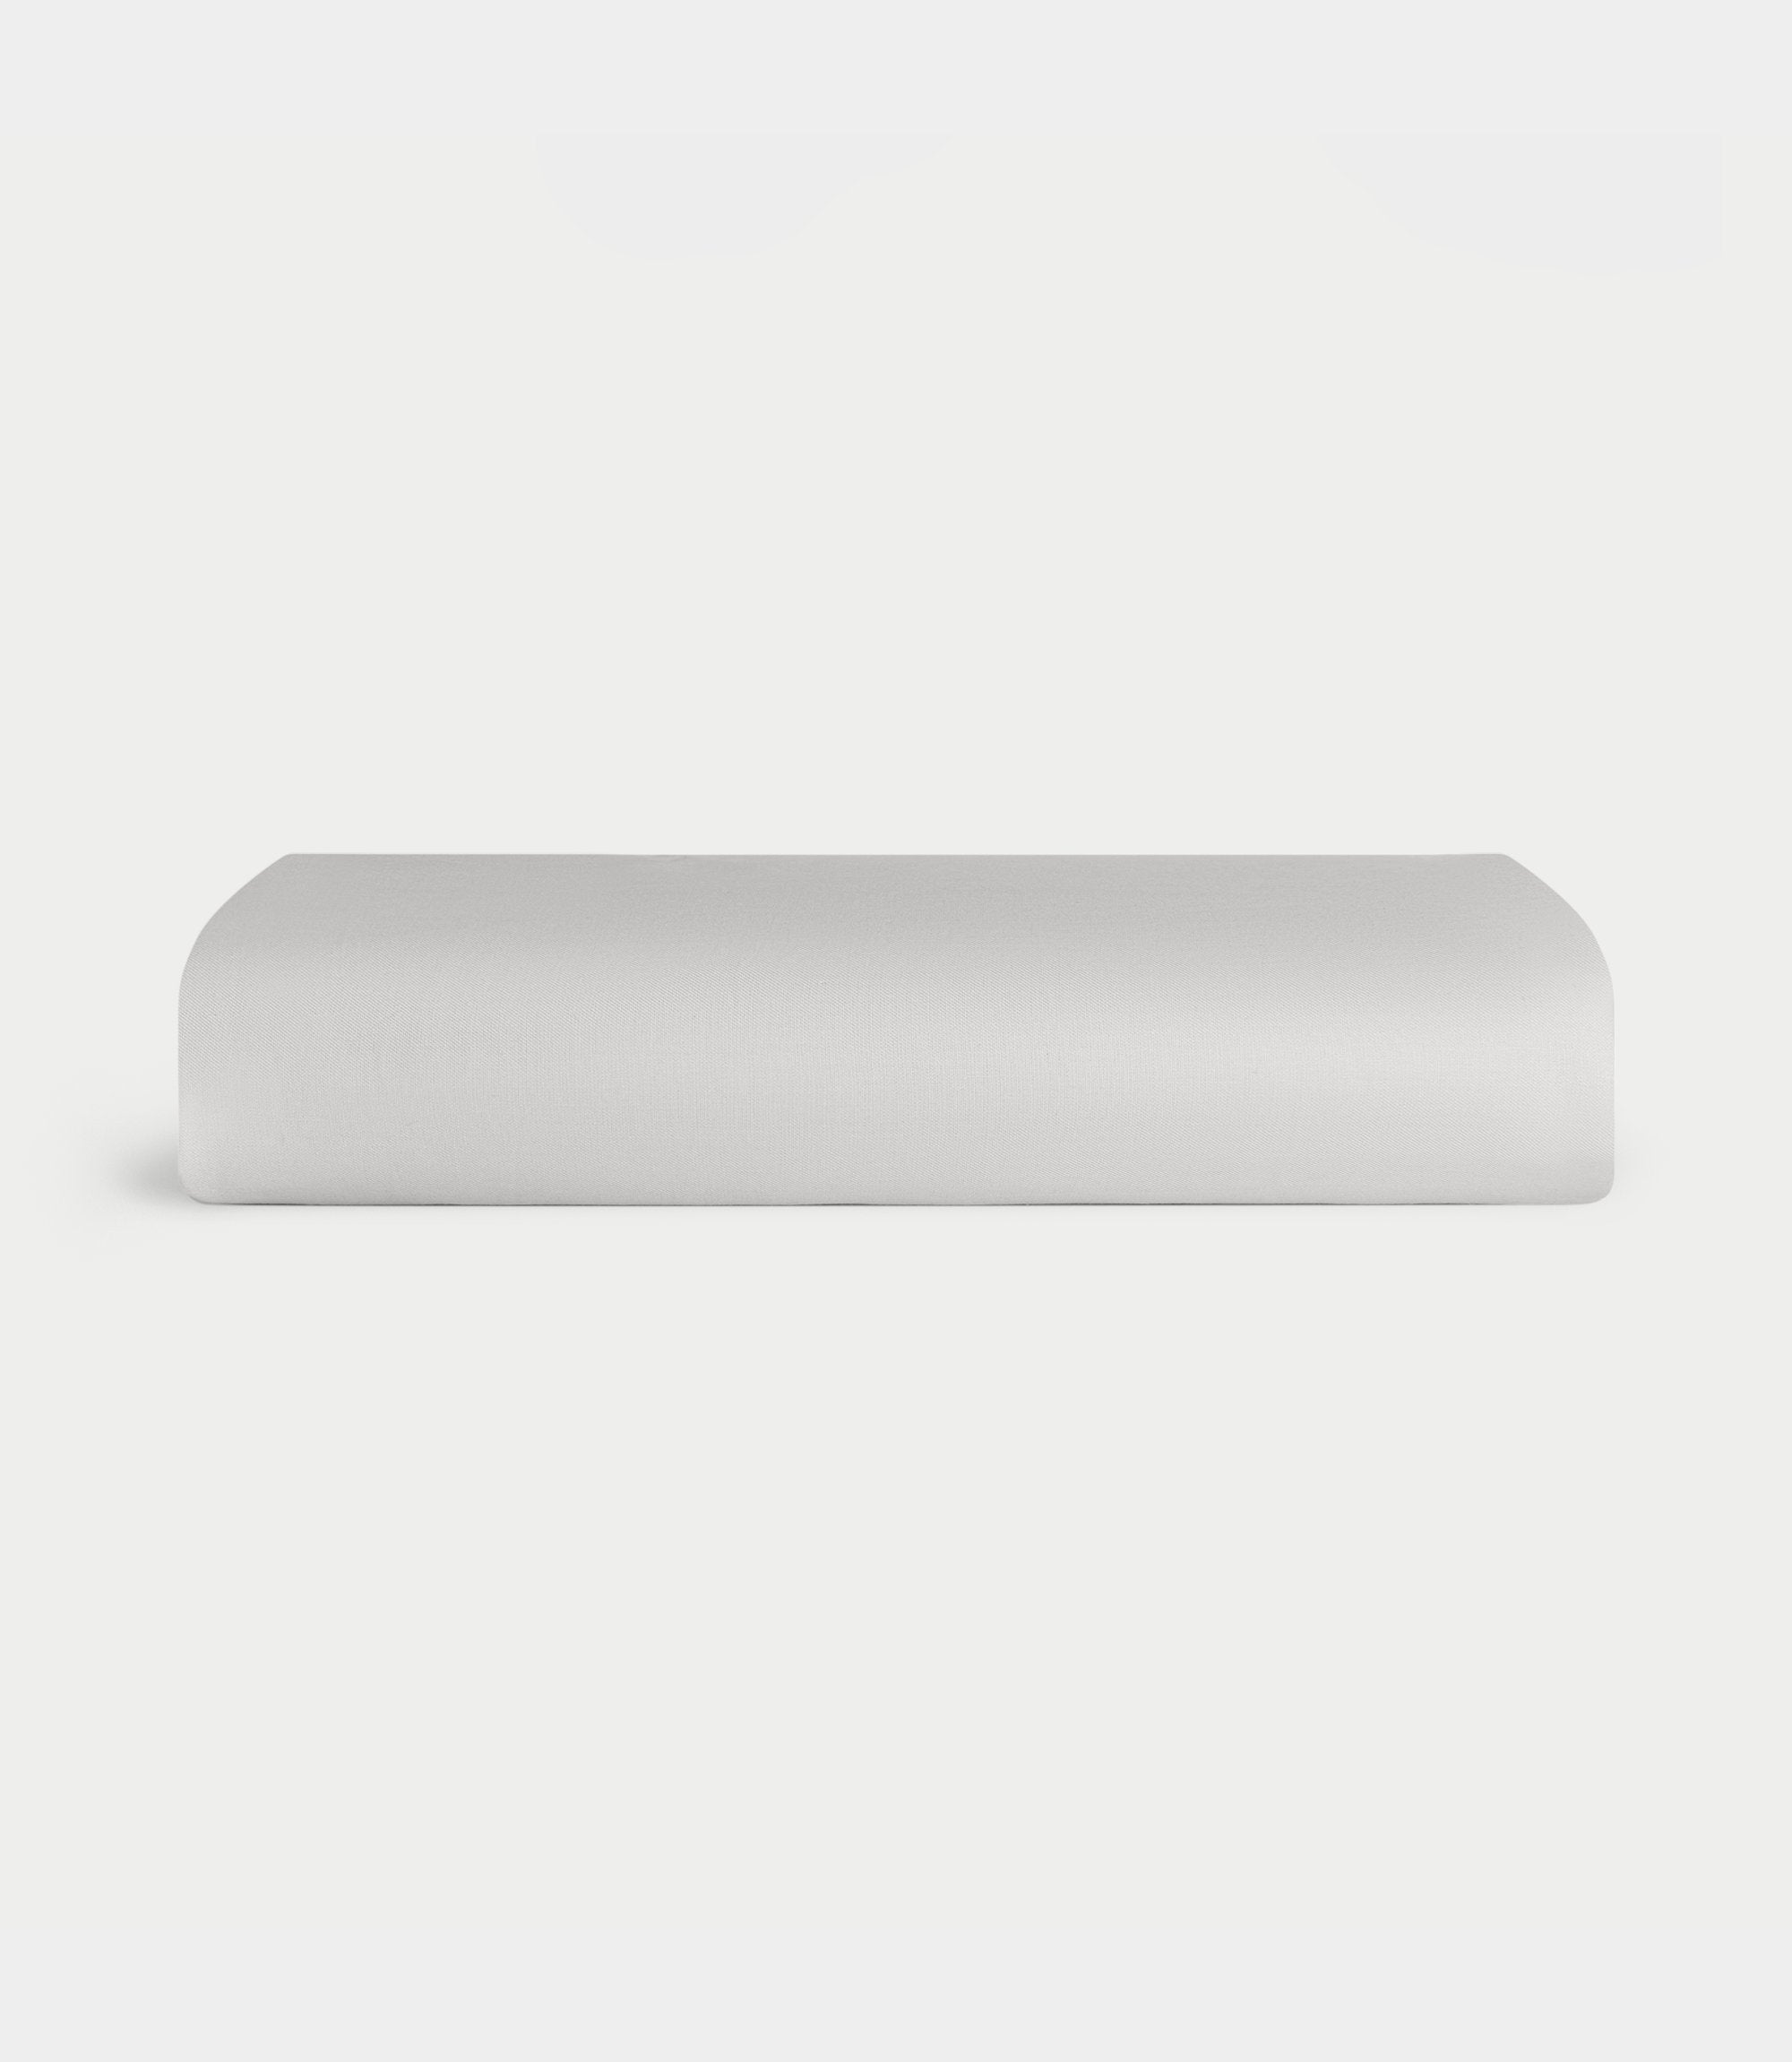 Light Grey Bamboo Linen Fitted Sheet Folded over a white background. |Color: Light Grey